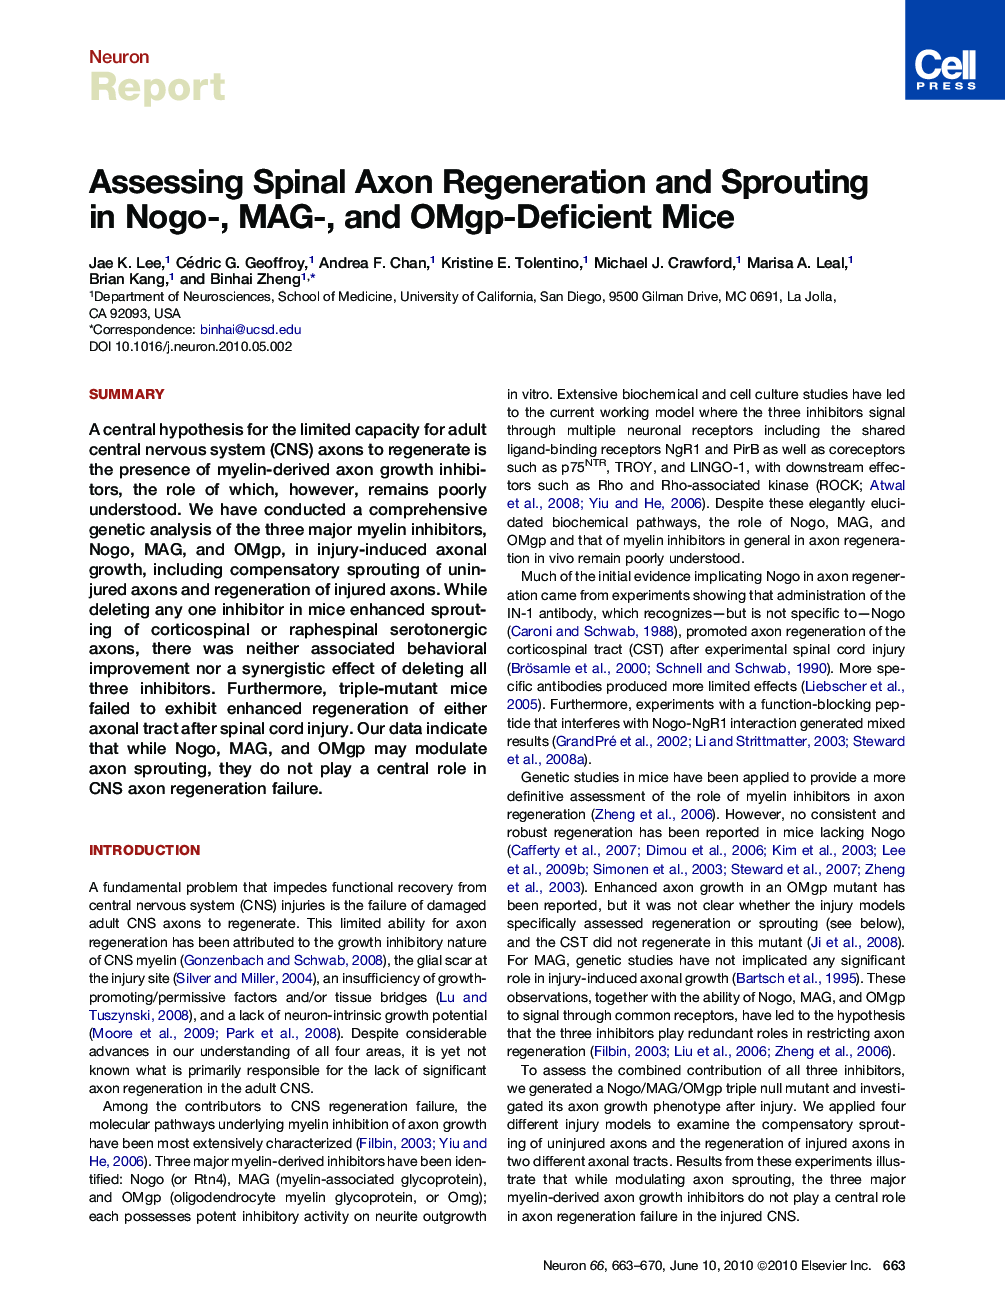 Assessing Spinal Axon Regeneration and Sprouting in Nogo-, MAG-, and OMgp-Deficient Mice